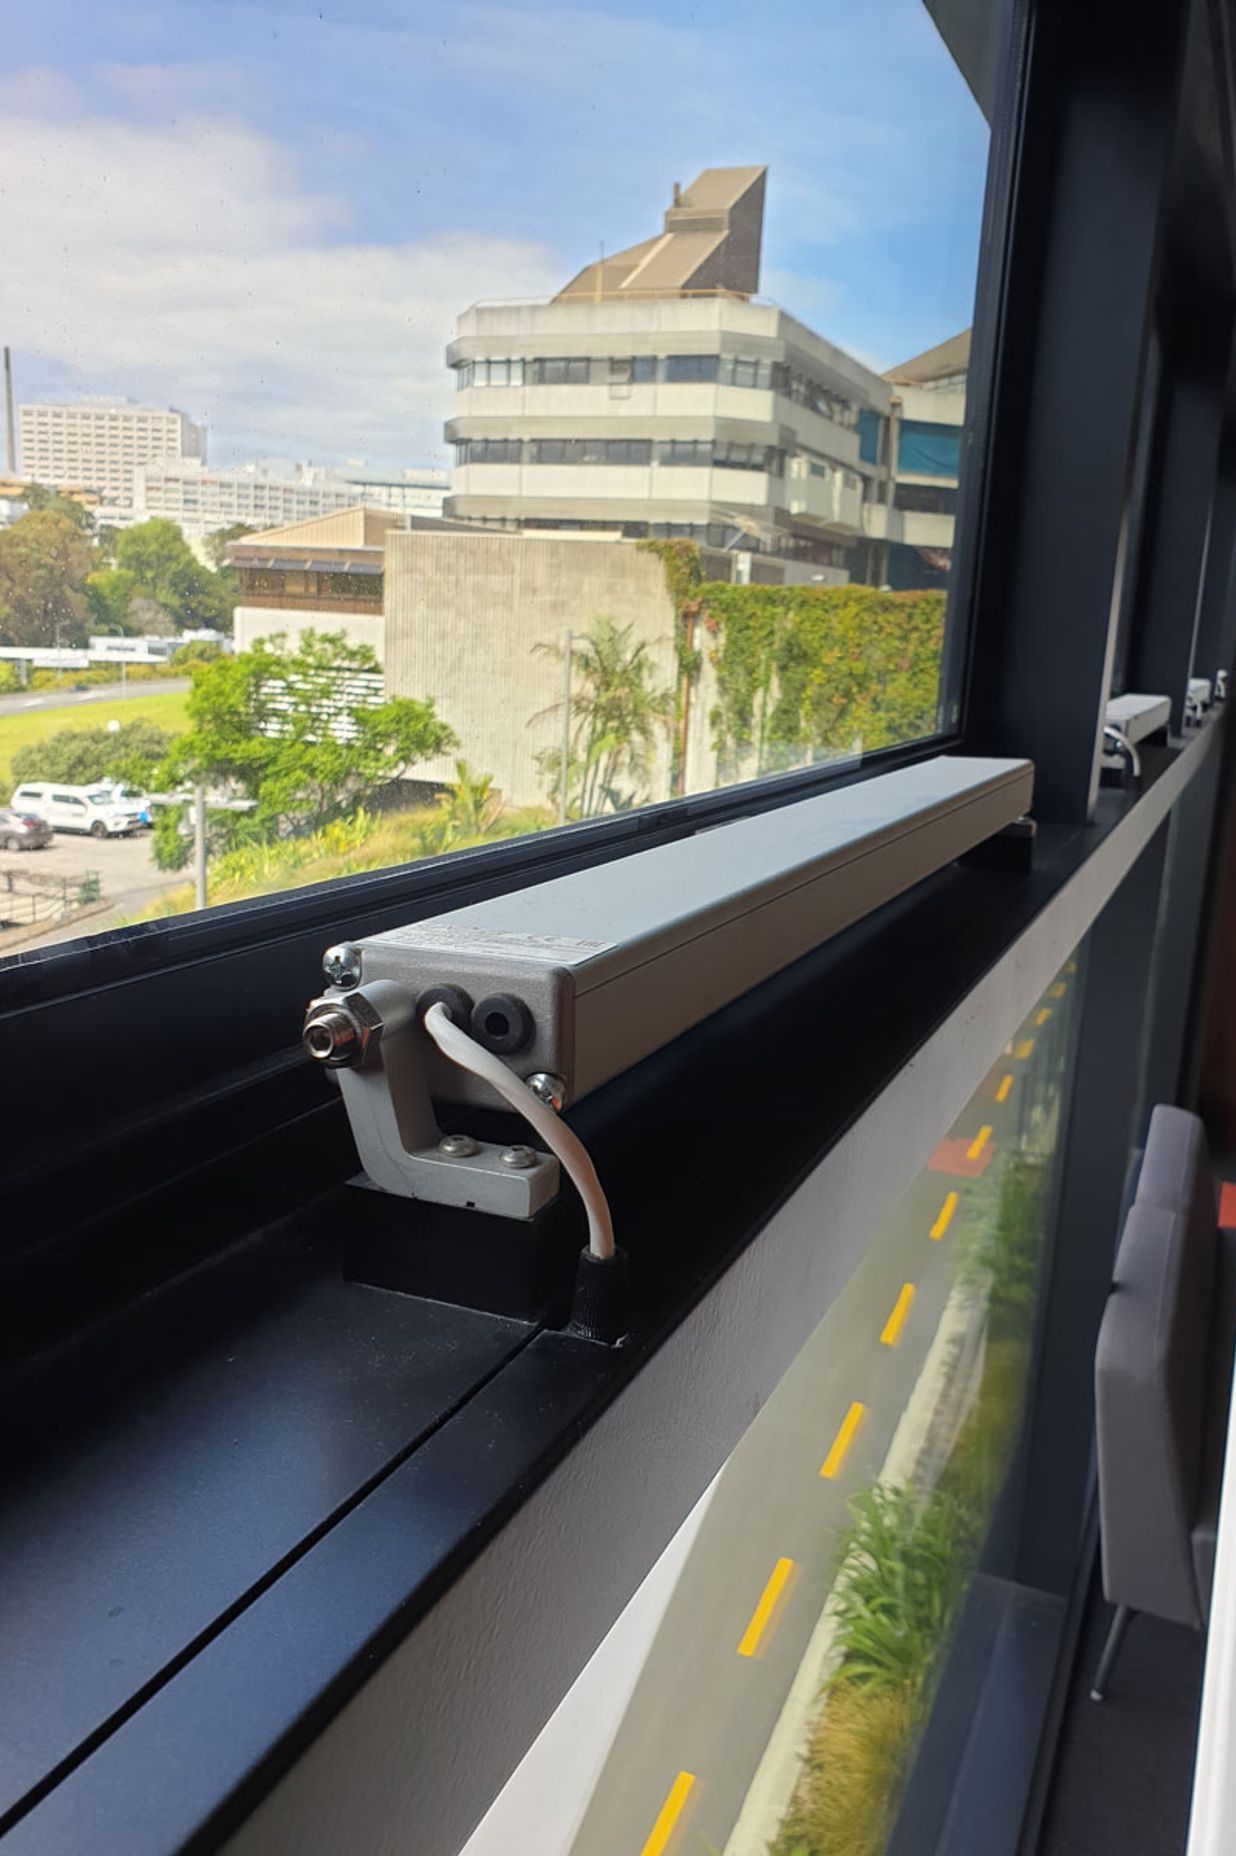 At the University of Auckland's Faculty of Engineering building, windows are connected to the building management system and fire alarm system.